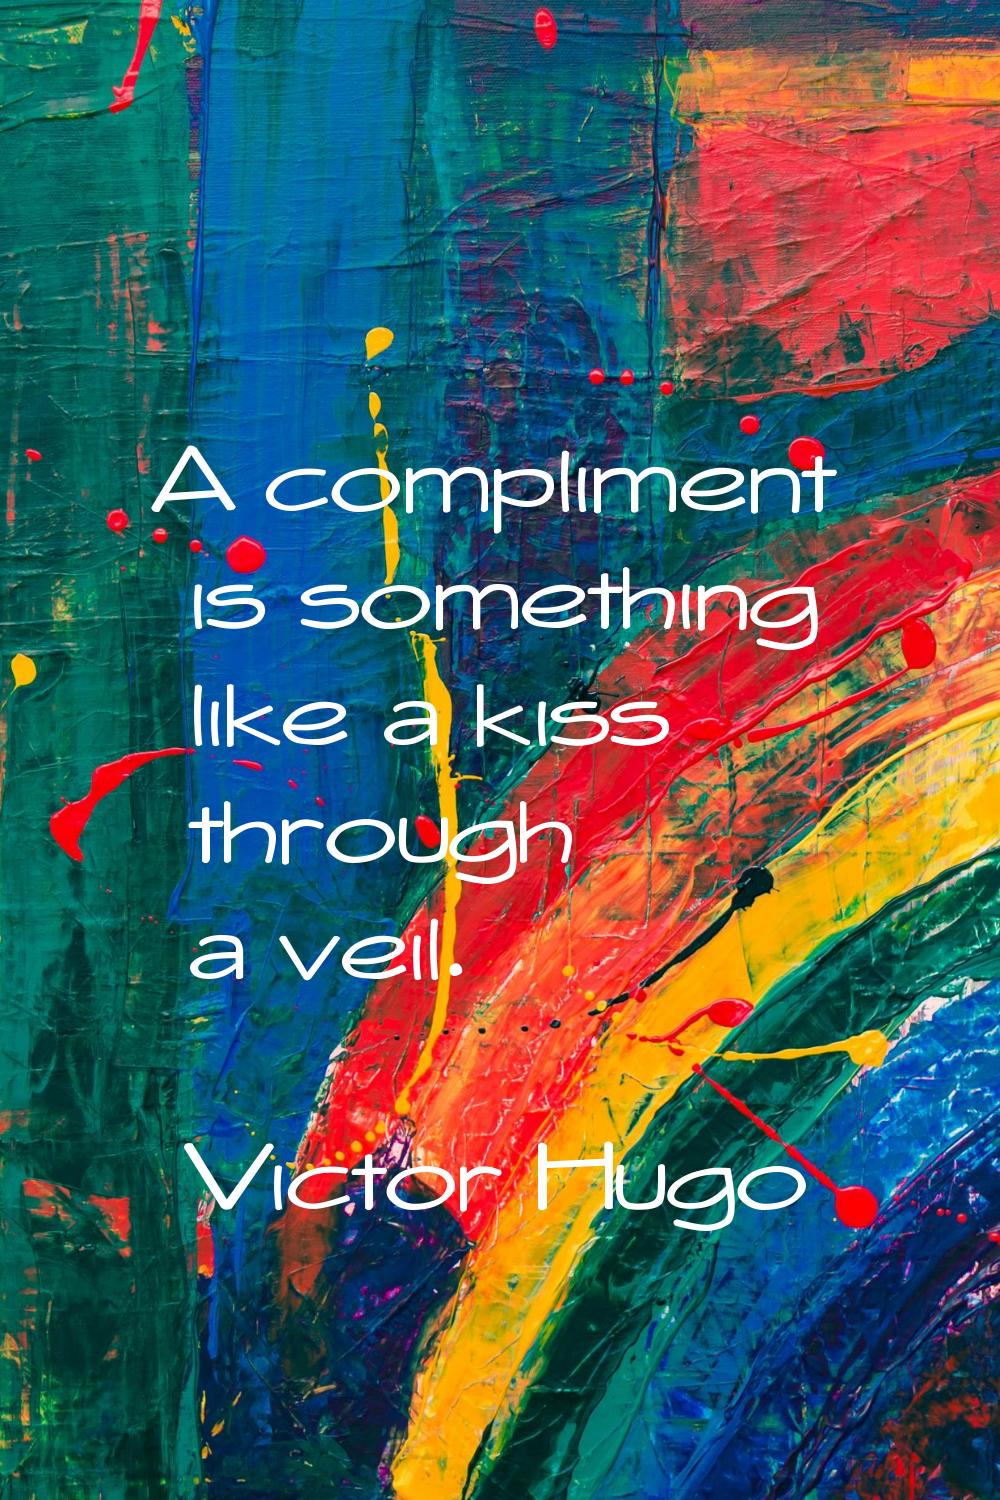 A compliment is something like a kiss through a veil.